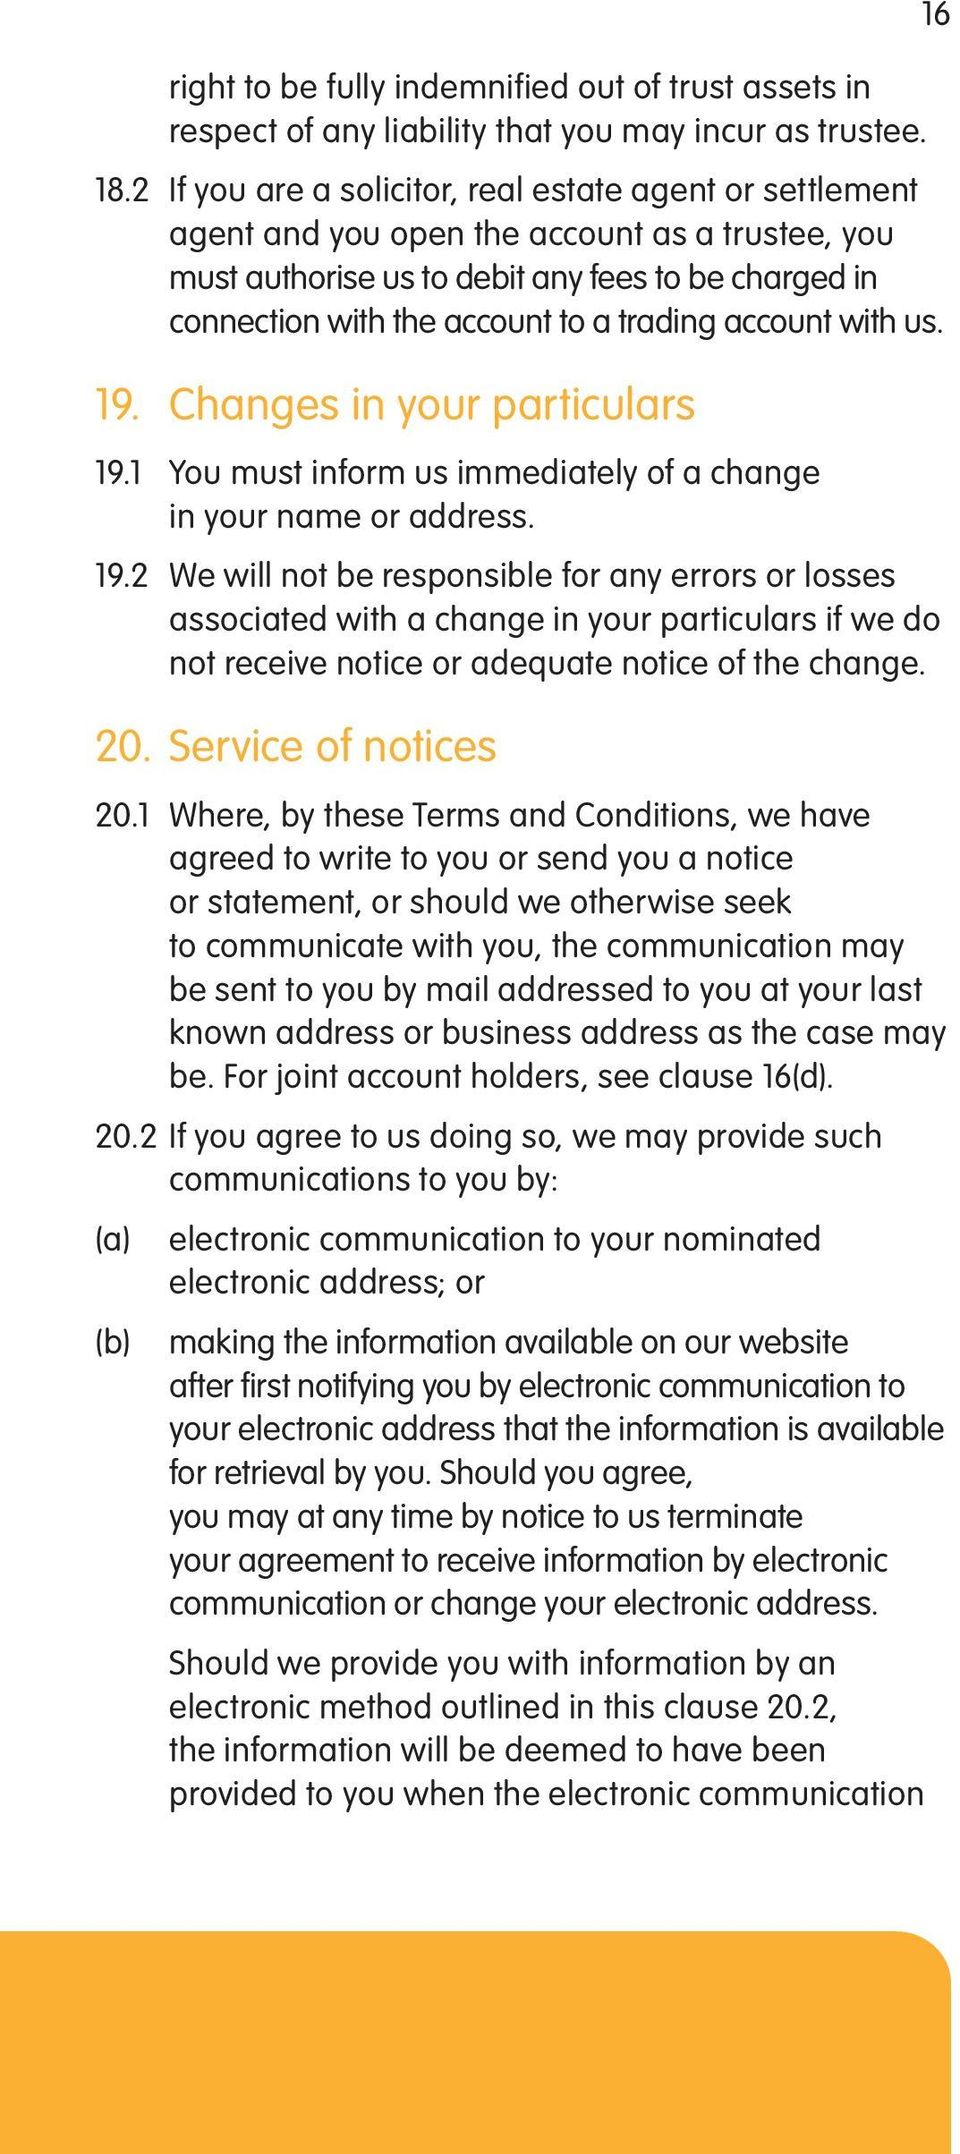 trading account with us. 19. Changes in your particulars 19.1 You must inform us immediately of a change in your name or address. 19.2 We will not be responsible for any errors or losses associated with a change in your particulars if we do not receive notice or adequate notice of the change.